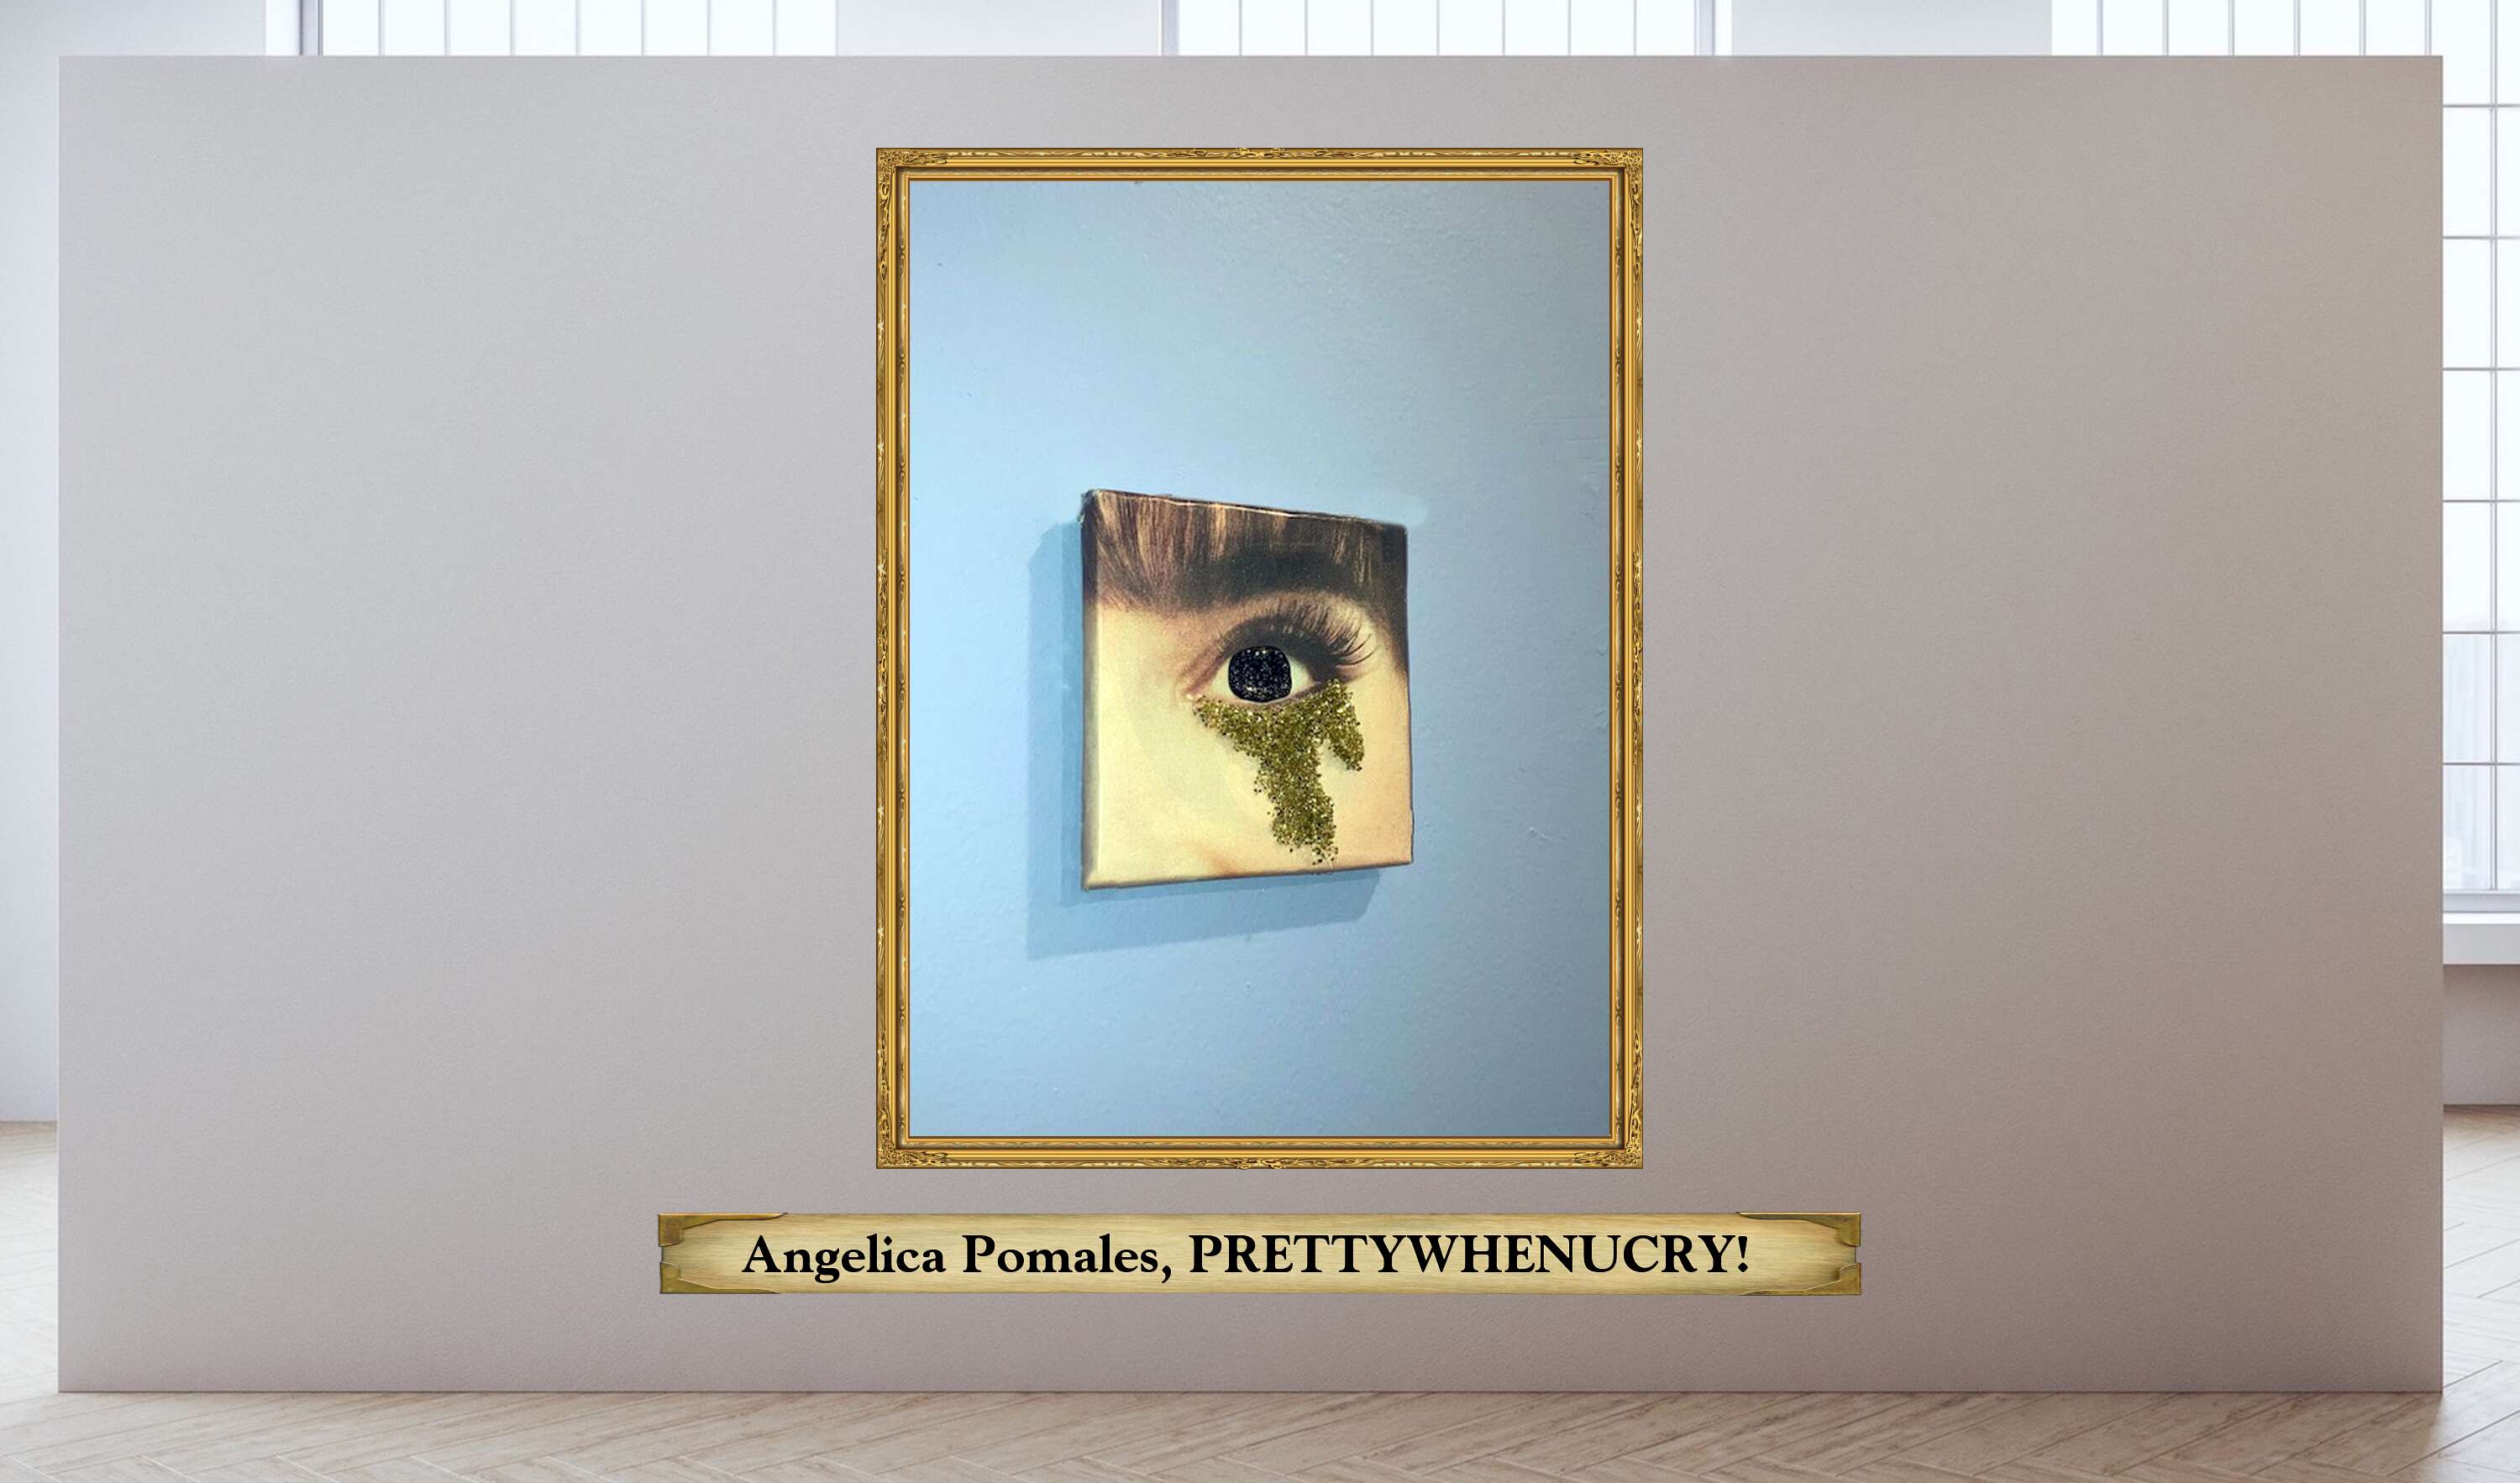 Angelica Pomales, PRETTYWHENUCRY!  